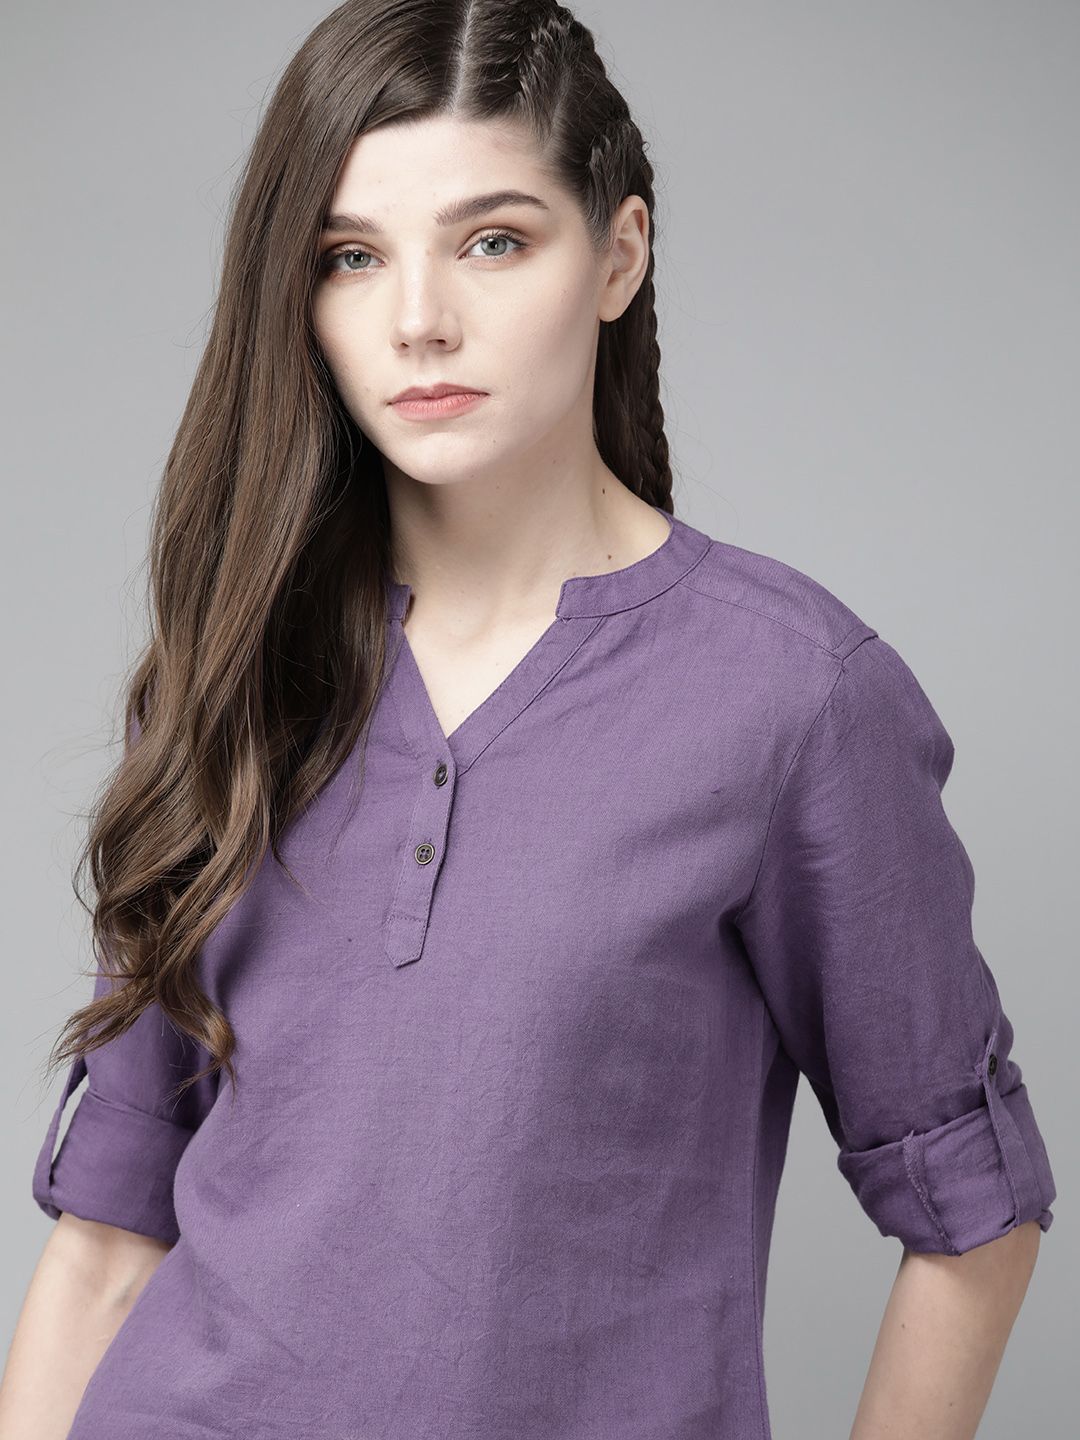 The Roadster Lifestyle Co Purple Cotton Linen Solid Mandarin Collar Top Price in India